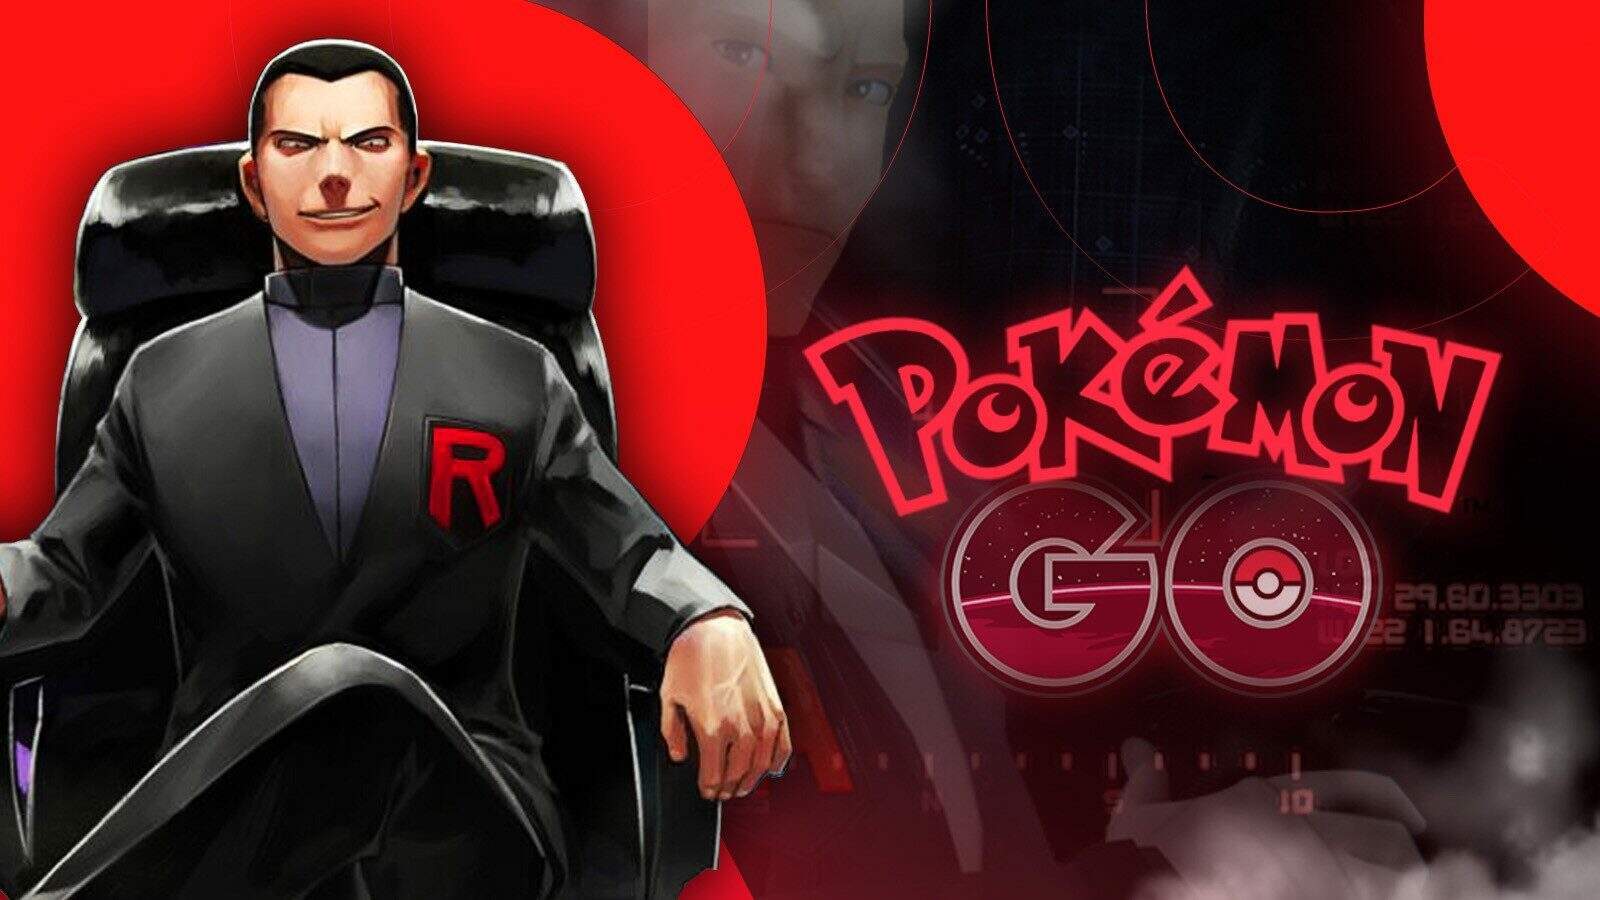 Pokemon go is invaded by team rocket | 60a2bc54 team rocket cape | android, mobile, multiplayer, niantic, nintendo, pokemon, pokemon go, singleplayer | pokemon go news